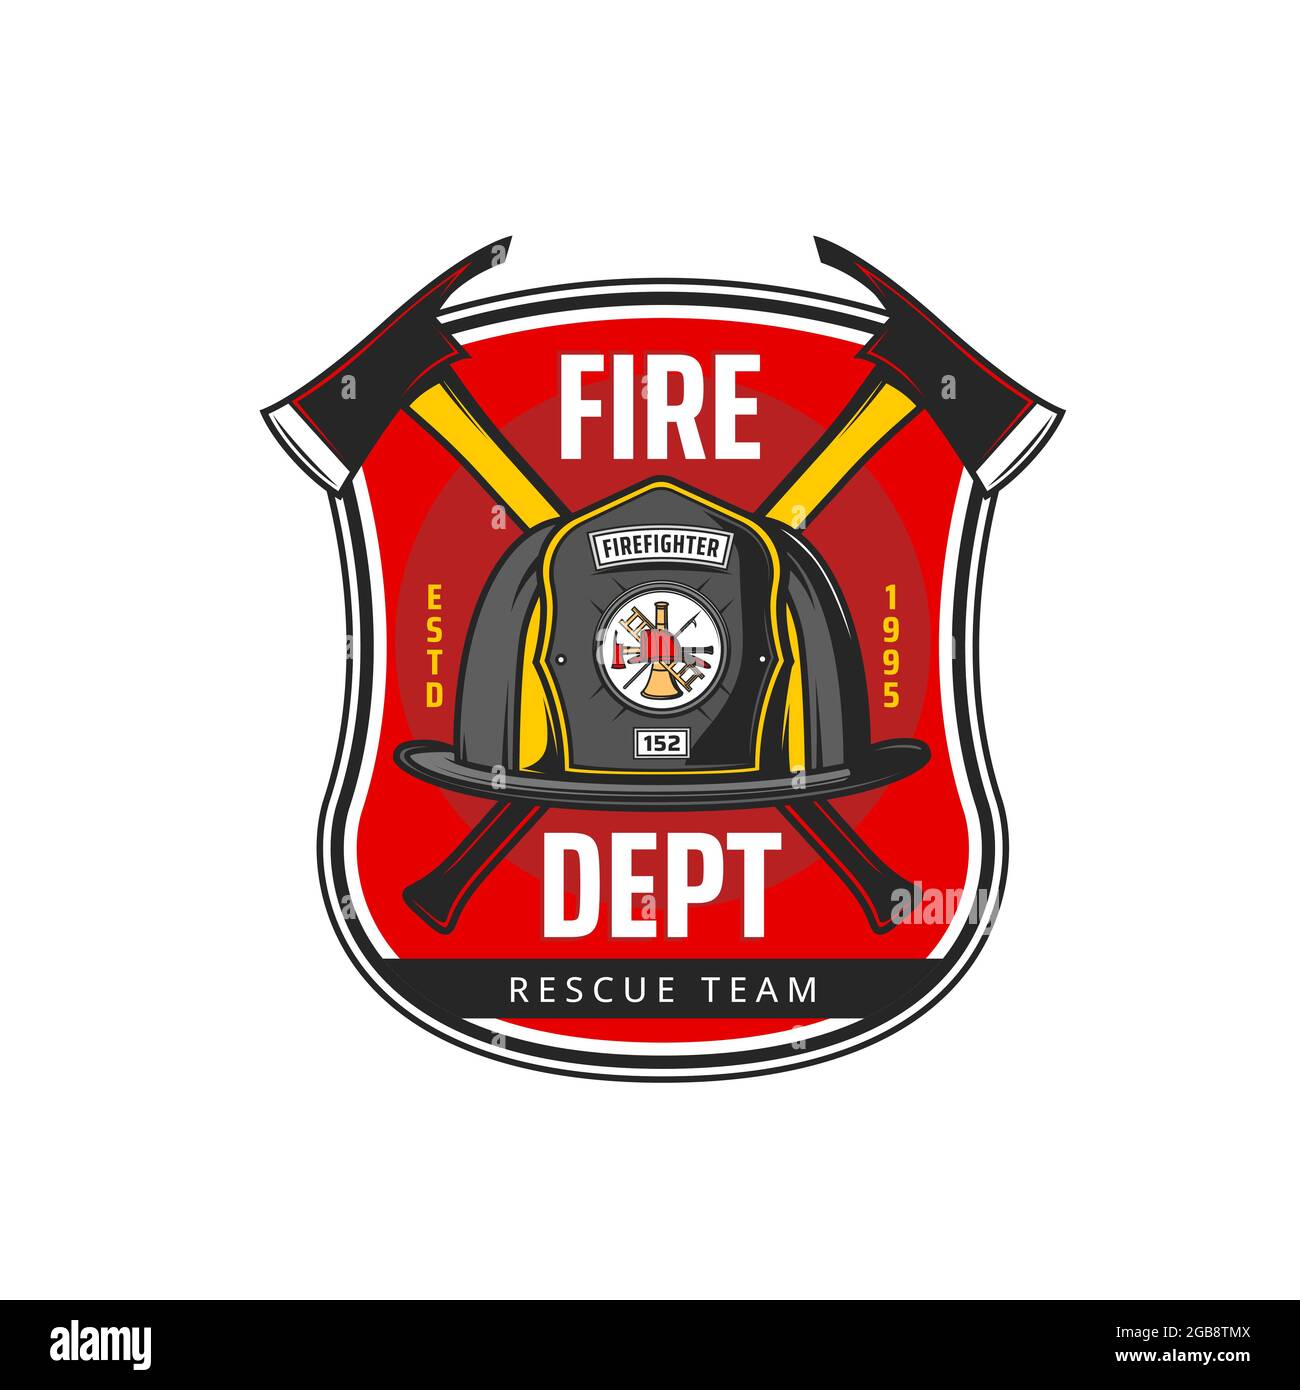 Fire department icon with vector fireman or firefighter helmet and crossed axes, ladder and hook. Firefighting equipment and tools isolated heraldic s Stock Vector